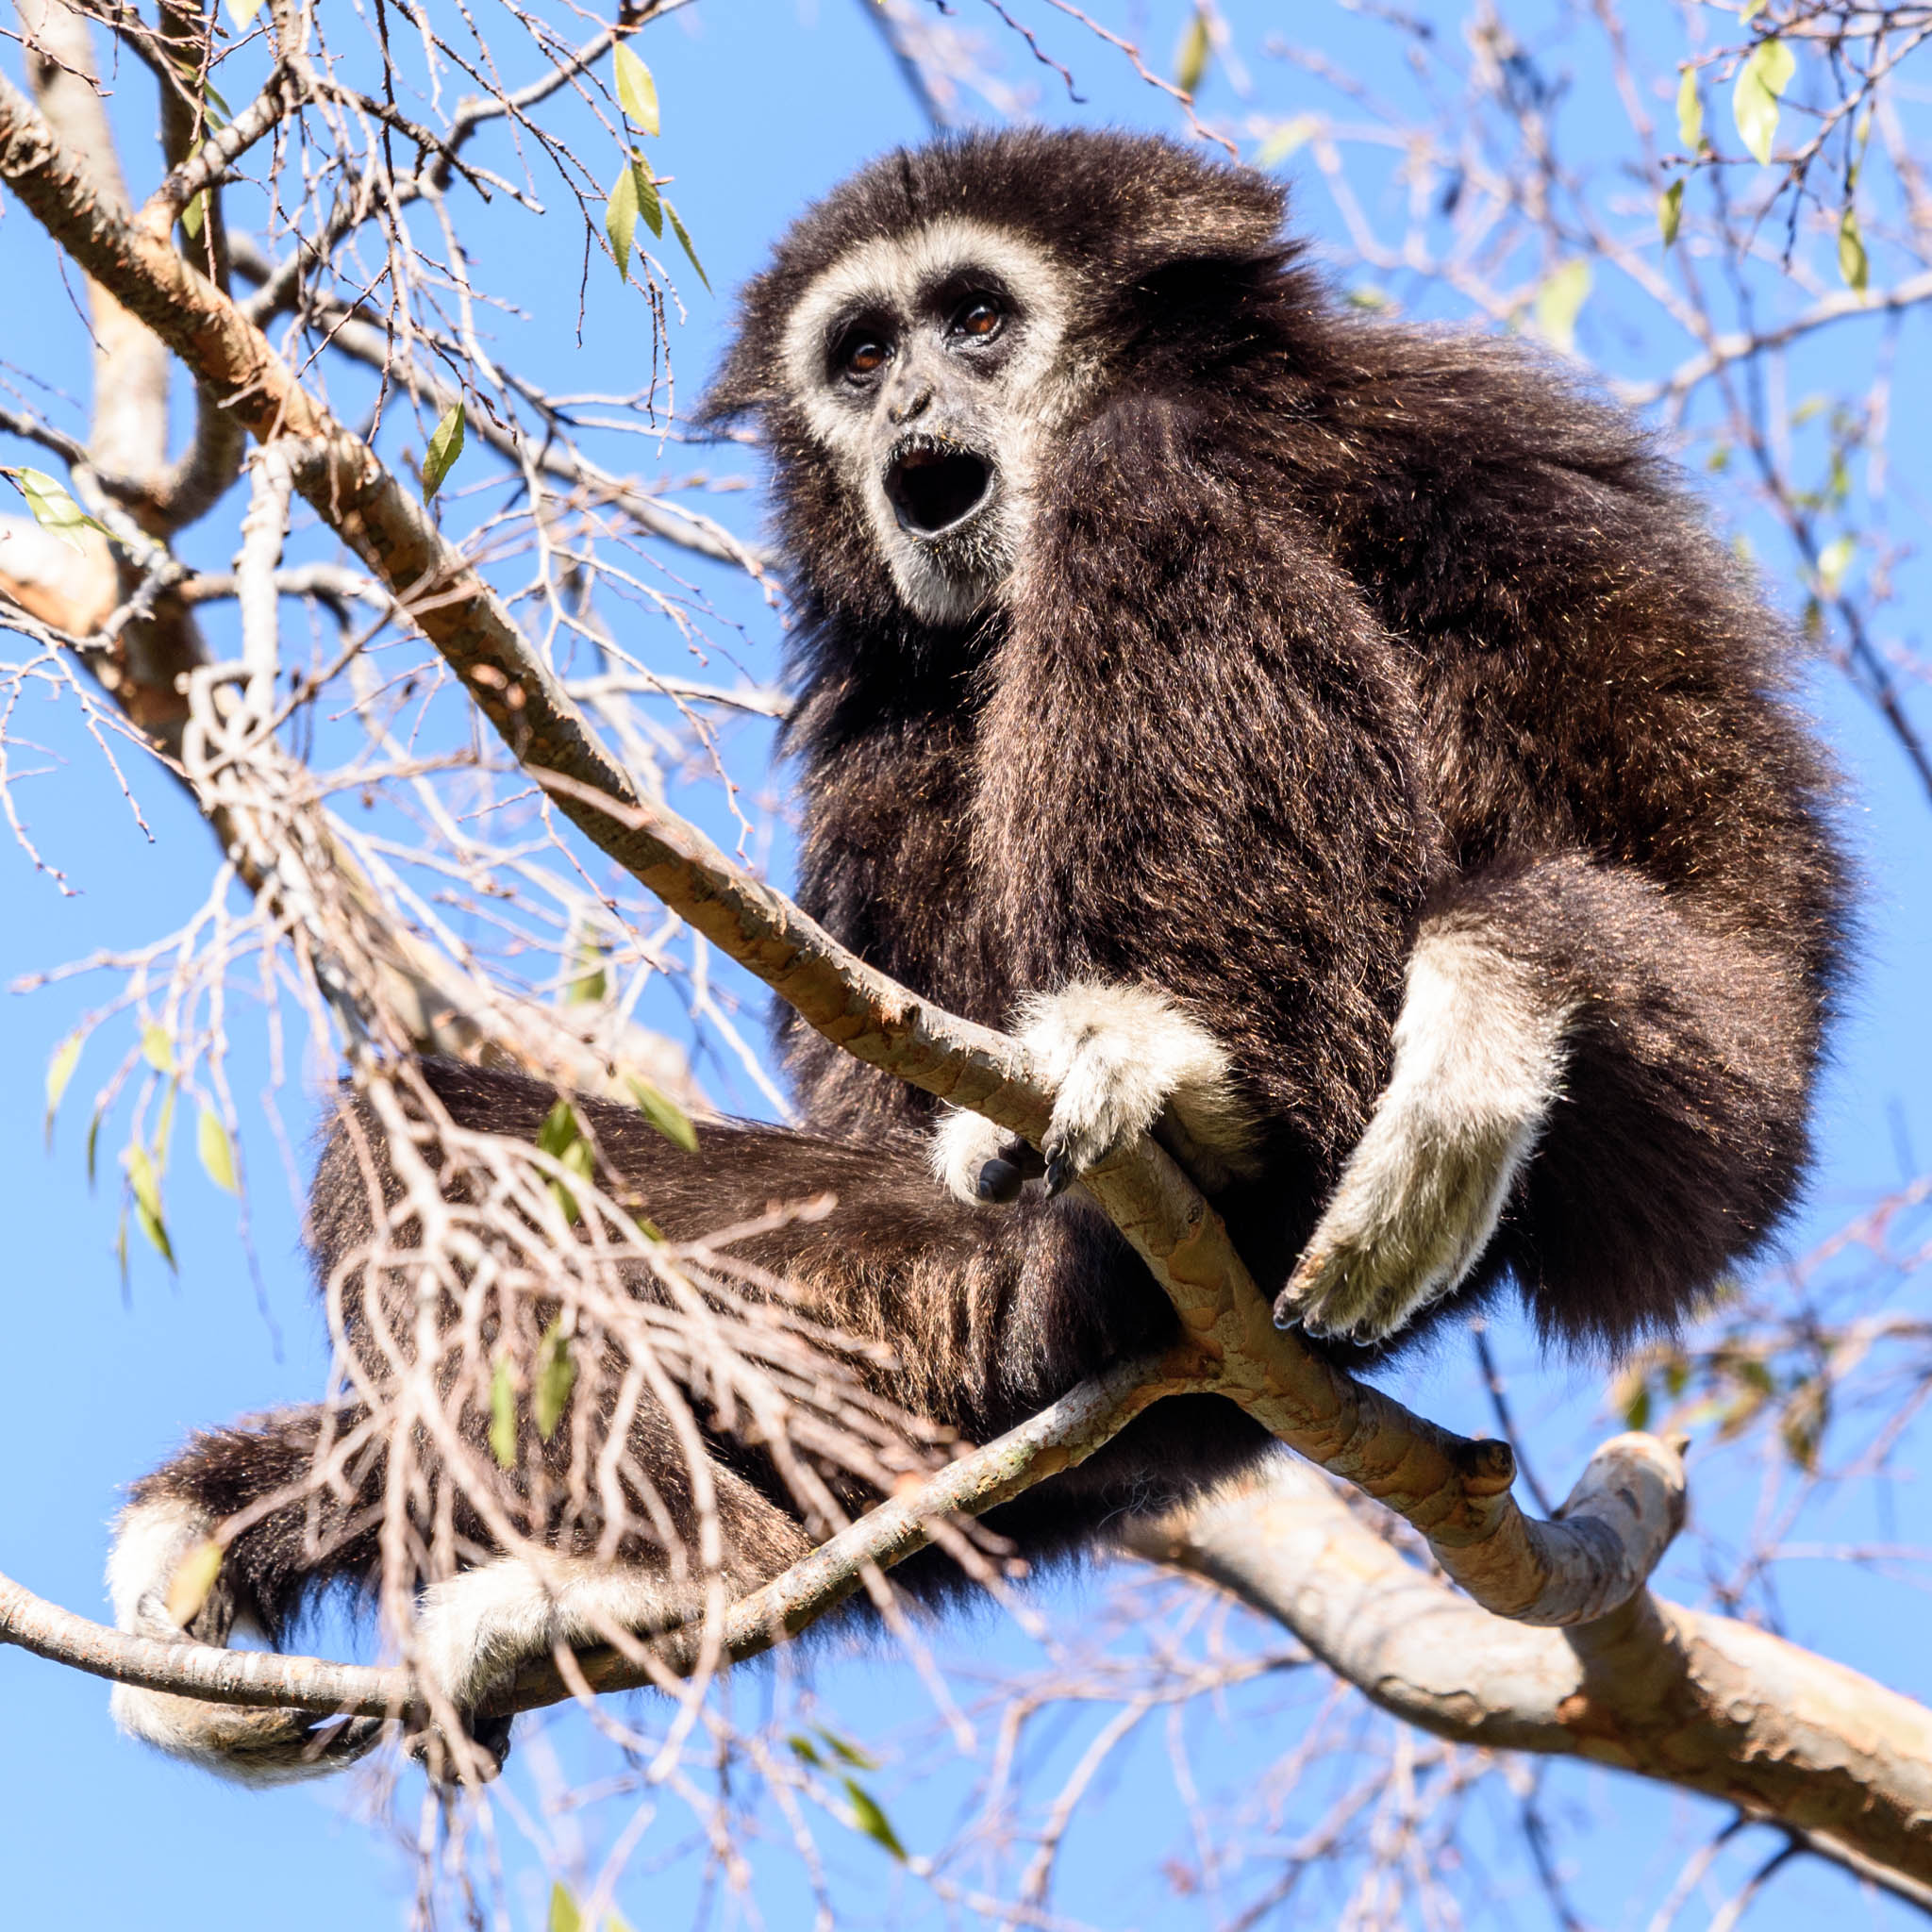 Elderly gibbon dies before going on view at SB Zoo